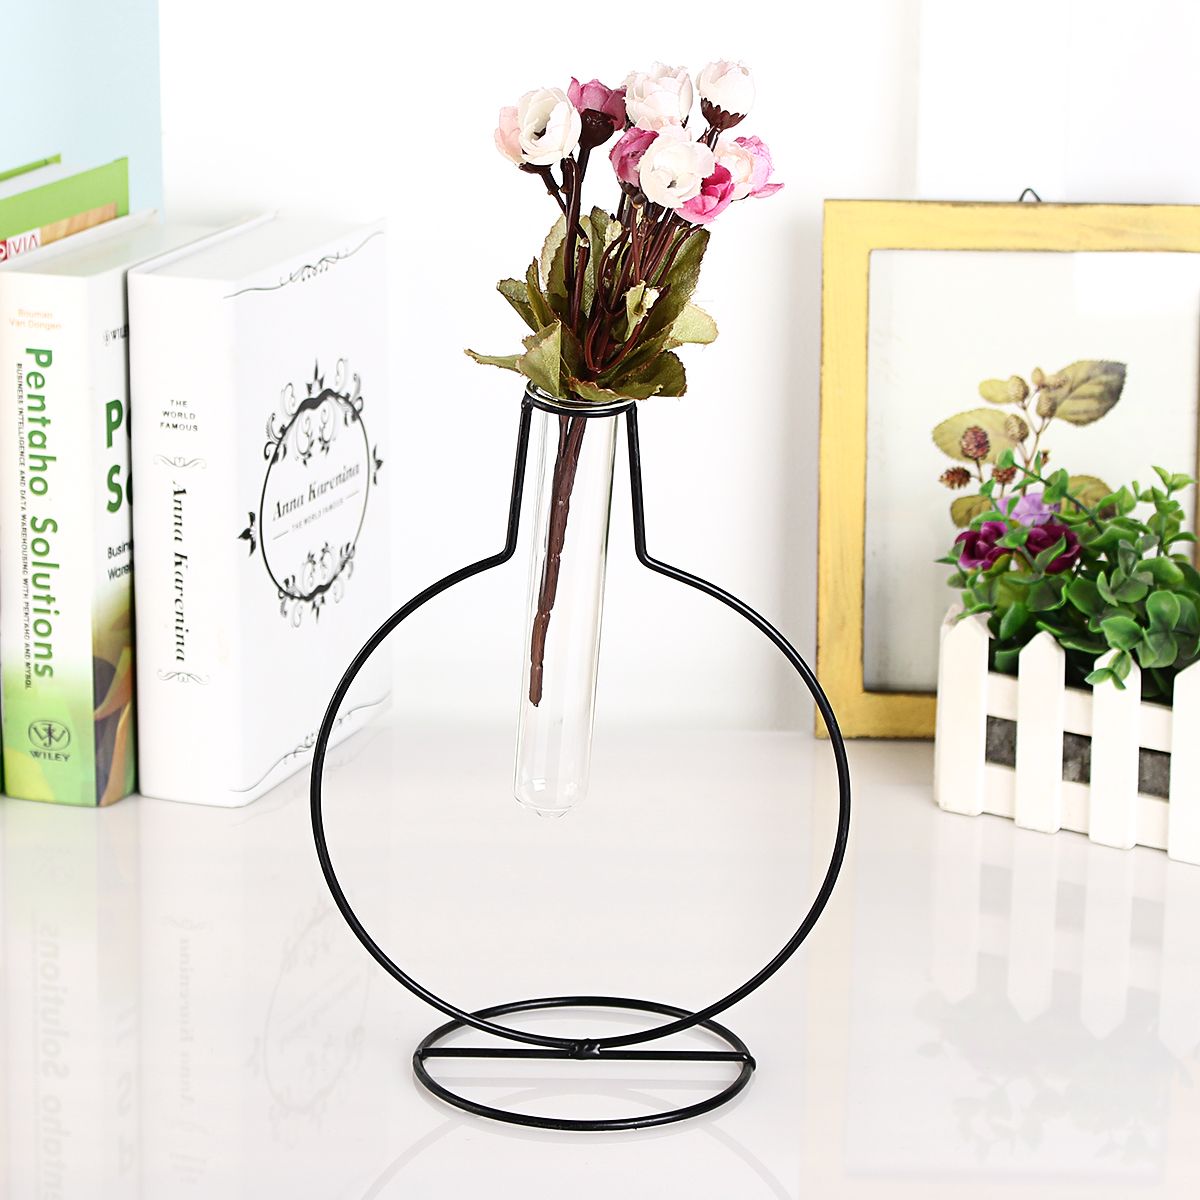 Flower-Vase-Holder-Plant-Display-with-Iron-Stand-and-Glass-Tube-for-Hydroponics-Ornament-Decorations-1447048